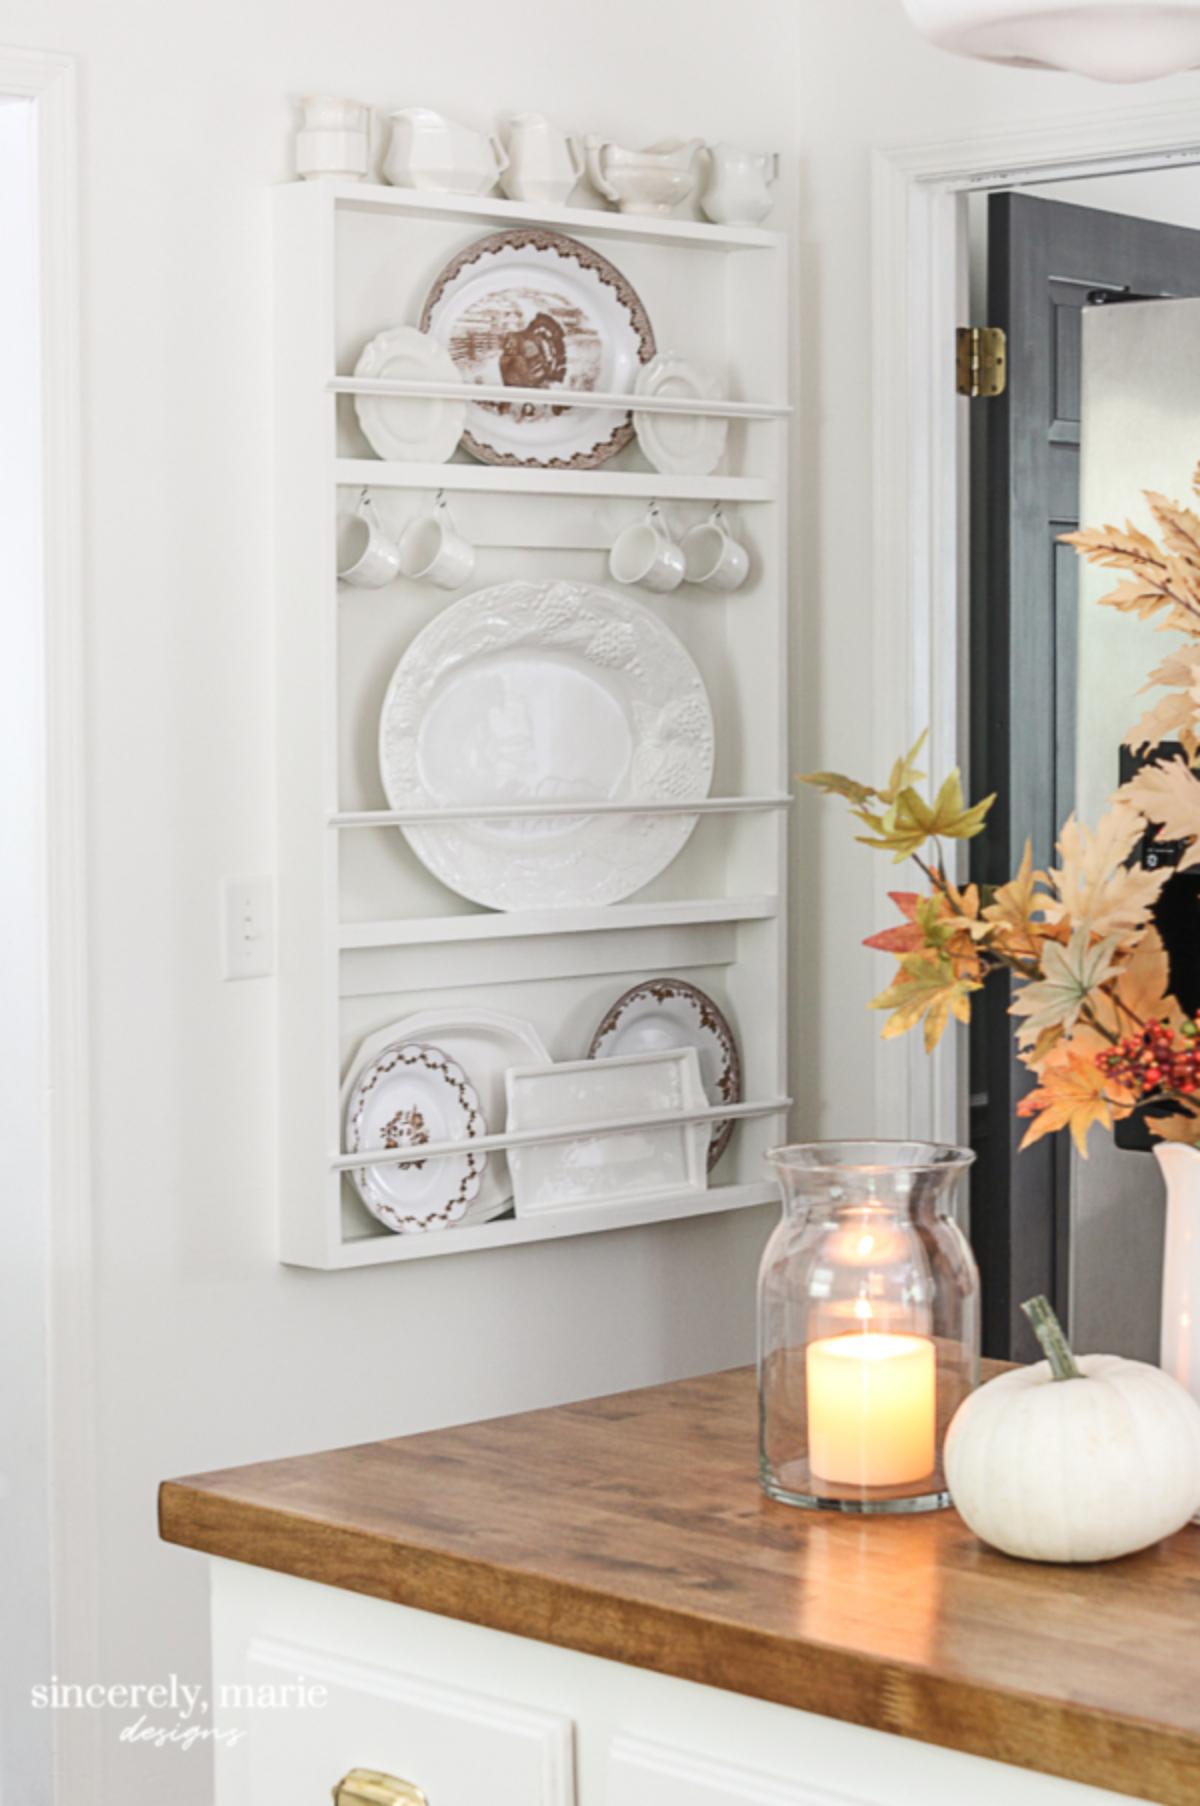 DIY Plate Rack in the Kitchen